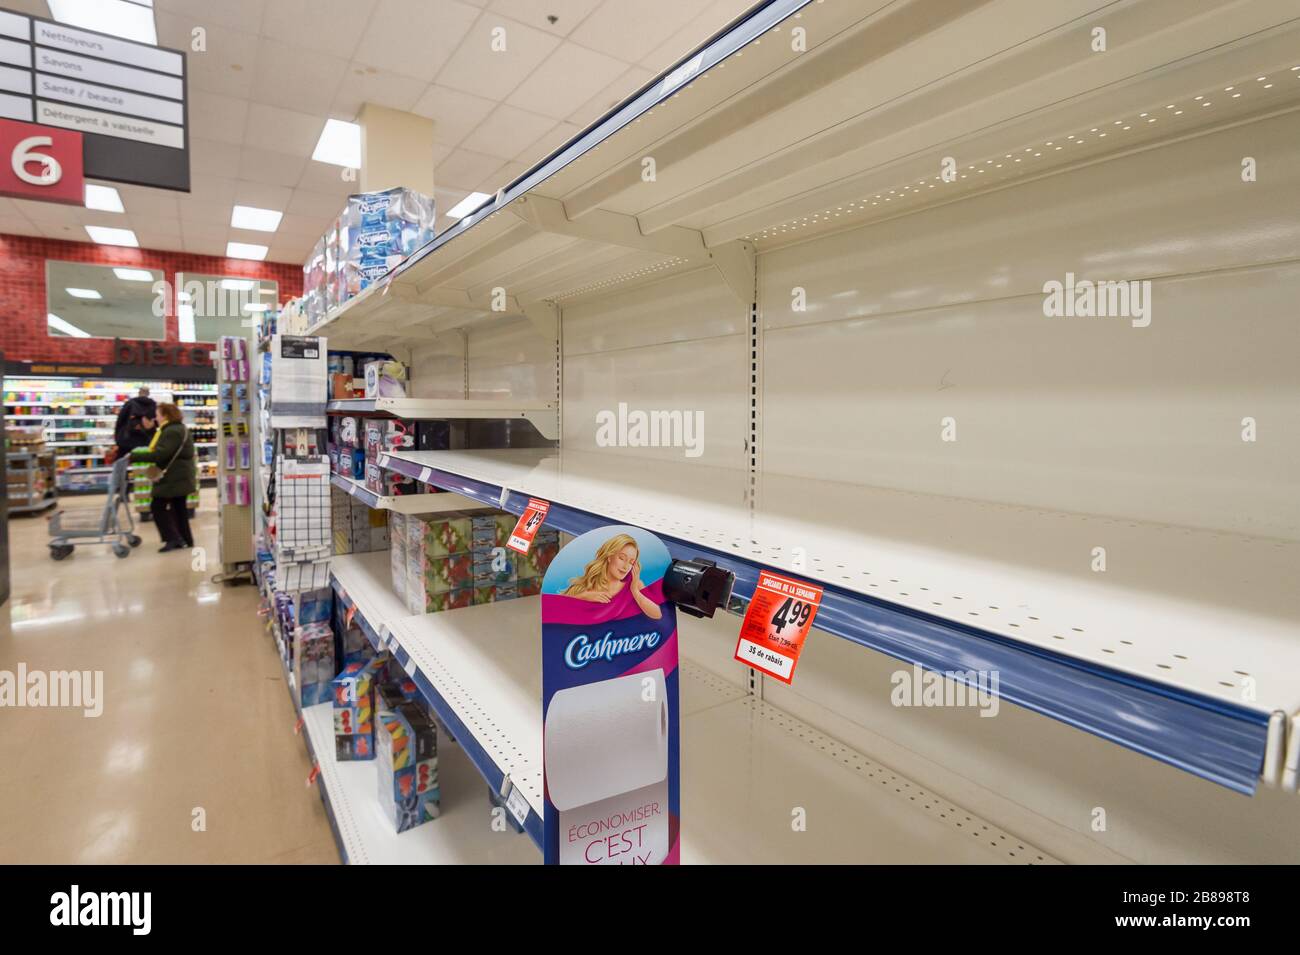 Montreal, CA - 20 March 2020: Empty shelves of toilet paper in a supermarket. Shortage of supplies due to panic of Coronavirus. Stock Photo